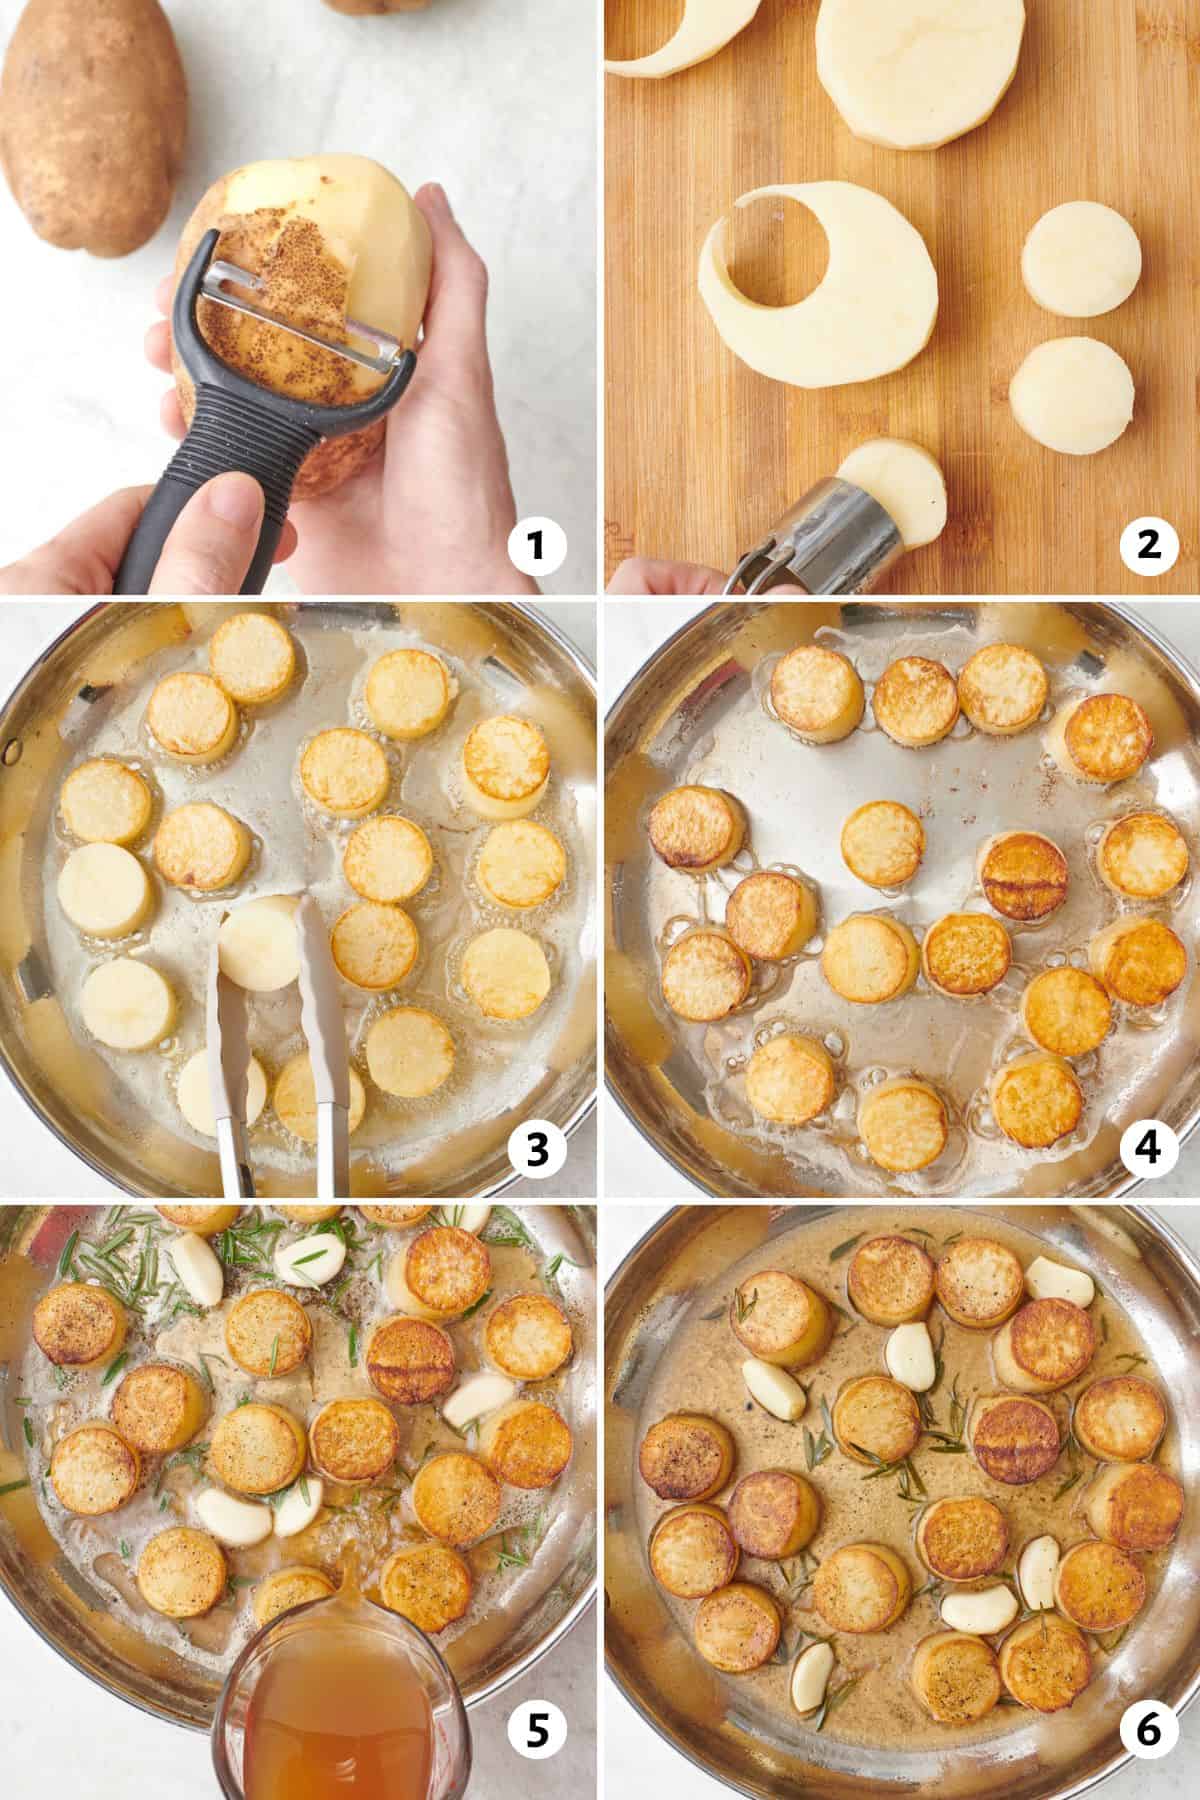 6 image collage making recipe: 1- peel potatoes, 2- cut potatoes into thick rounds with cookie cutter, 3- potato rounds in a skillet with tongs flipping one, 4- after flipping to show a carmalized crust, 5- broth being poured into pan with herbs and garlic cloves added, and 6- after roasting to show reduced sauce.